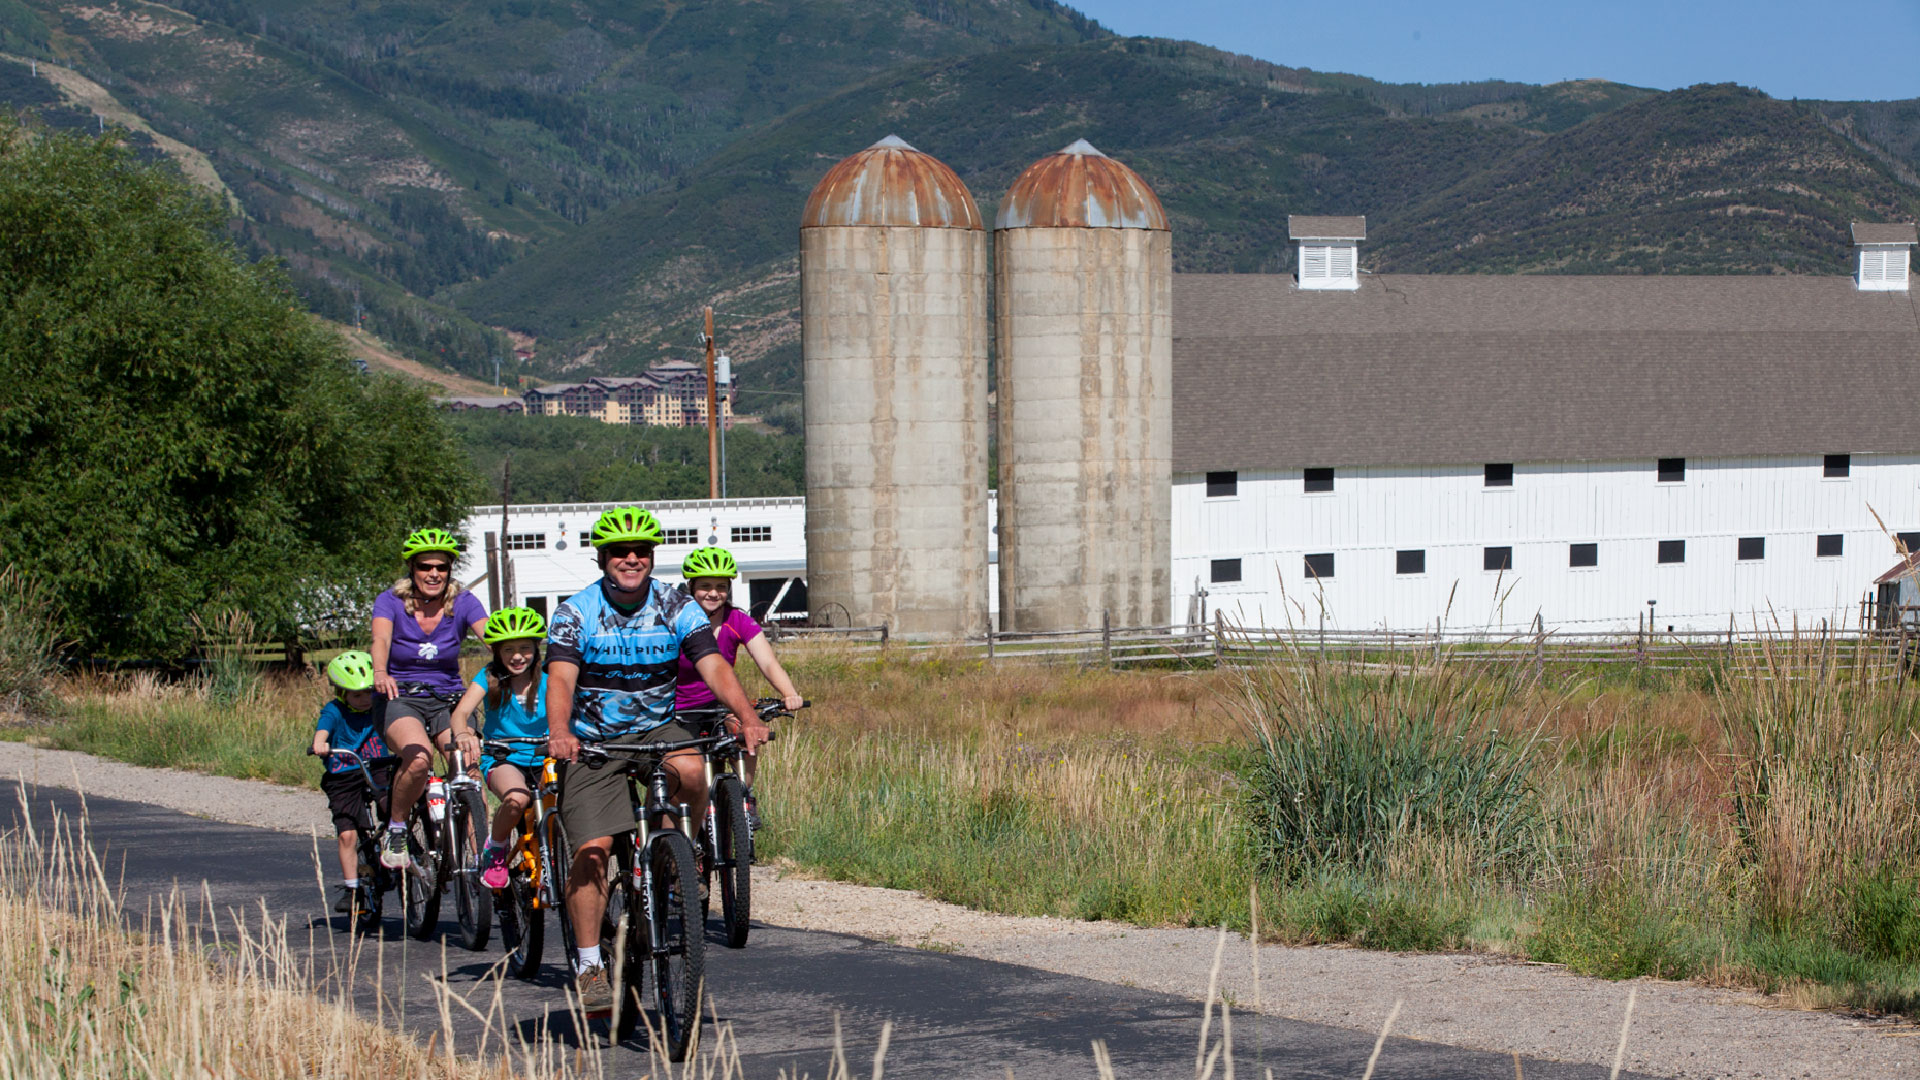 Guided Park City Bike Path Tour from White Pine Touring in Park City, UT.